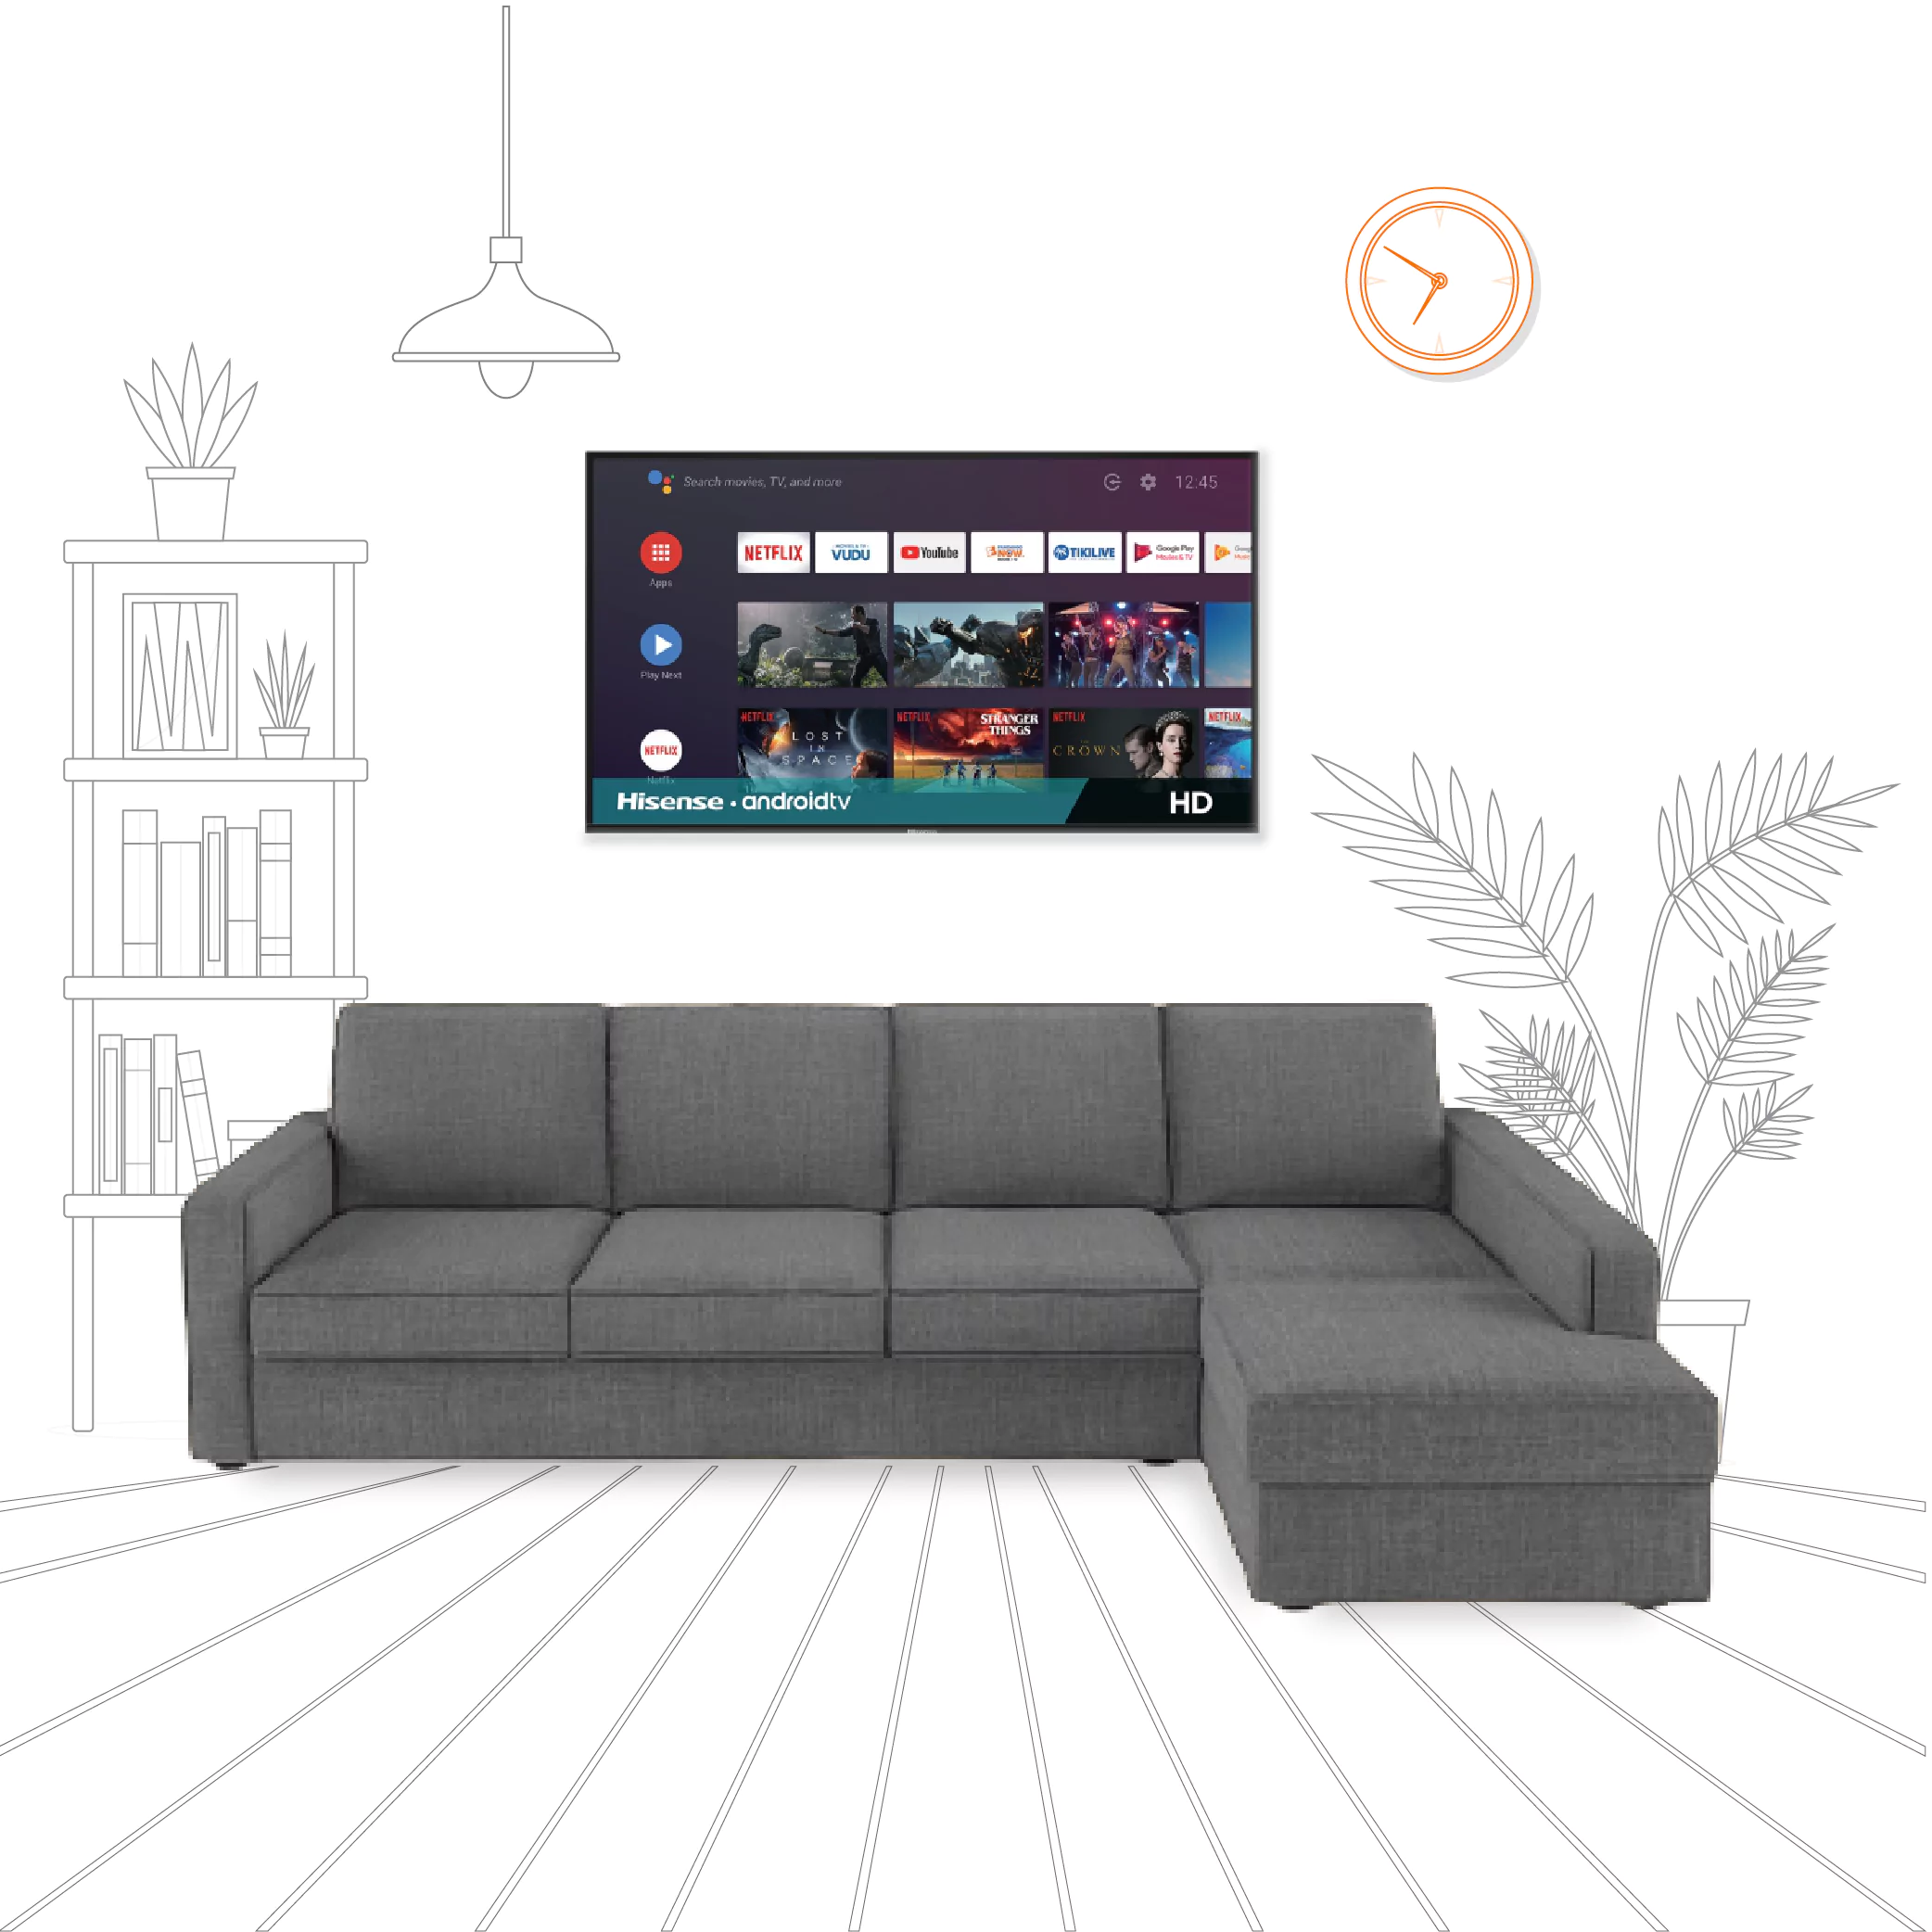 Combo -12- Klassik Grey L Shape Sofa (5 Seater - Left )  by Elitrus + TV 43 inches - Smart Android